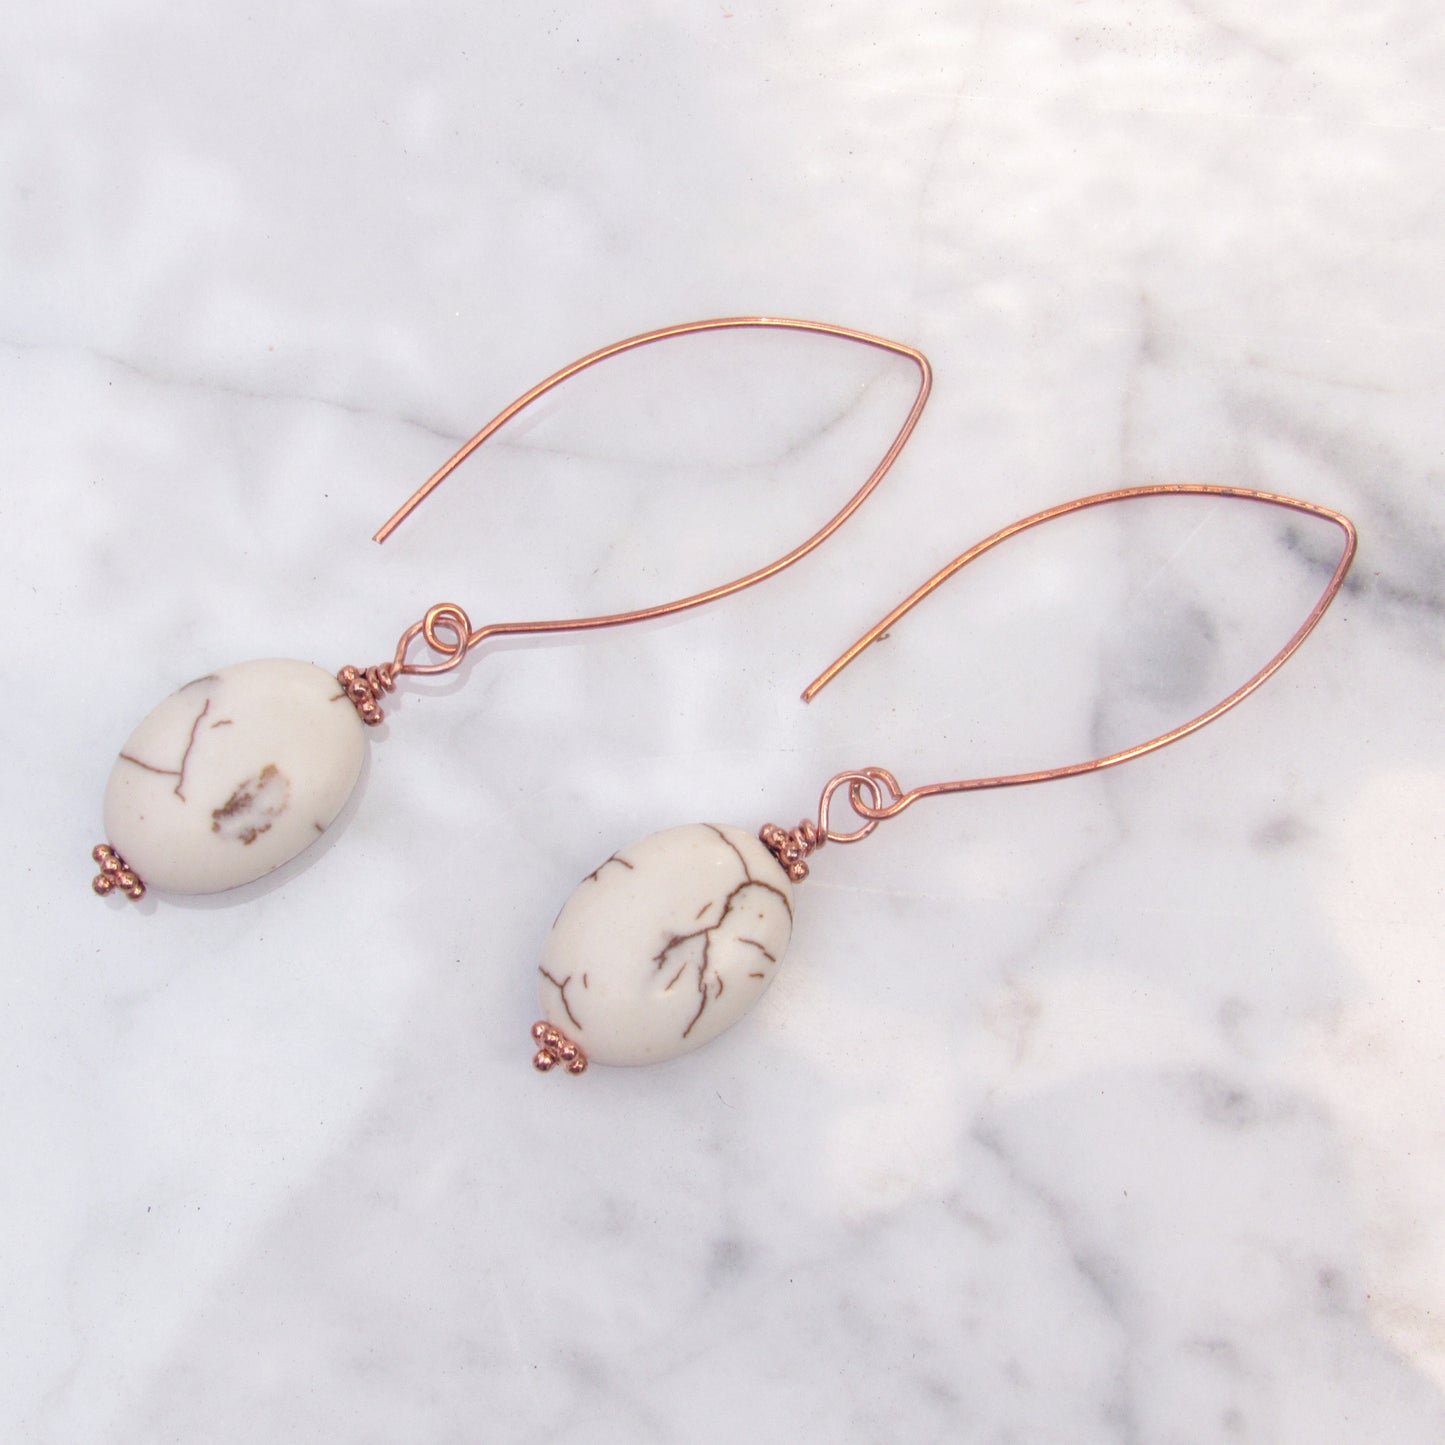 White turquoise Gemstone and copper earrings